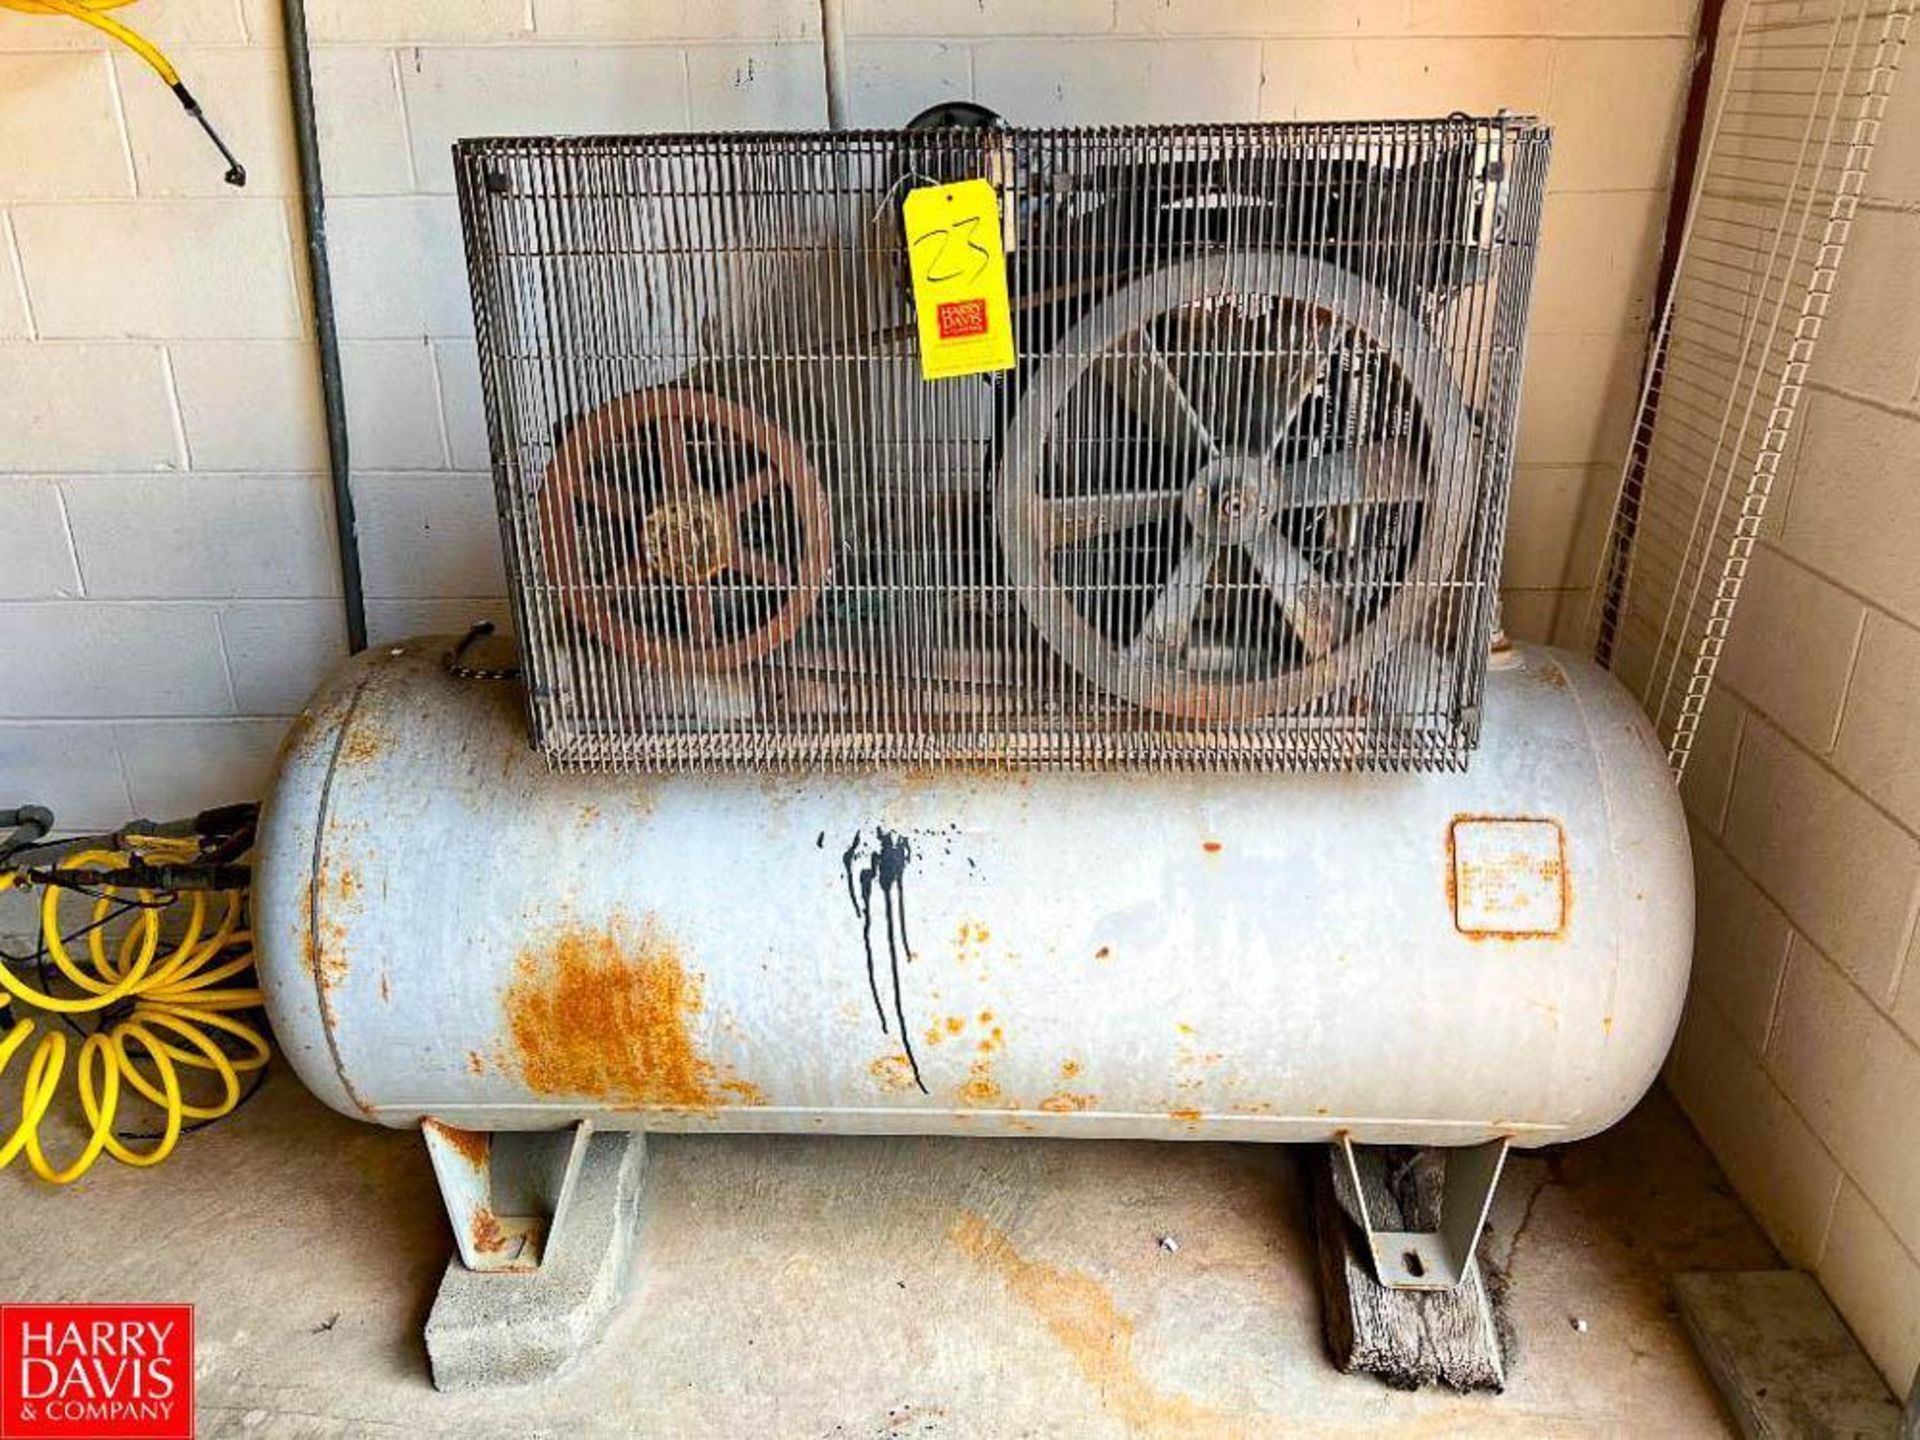 Ingersoll Rand 7.5 HP 200 PSIG Air Compressor with 120 Gallon Tank